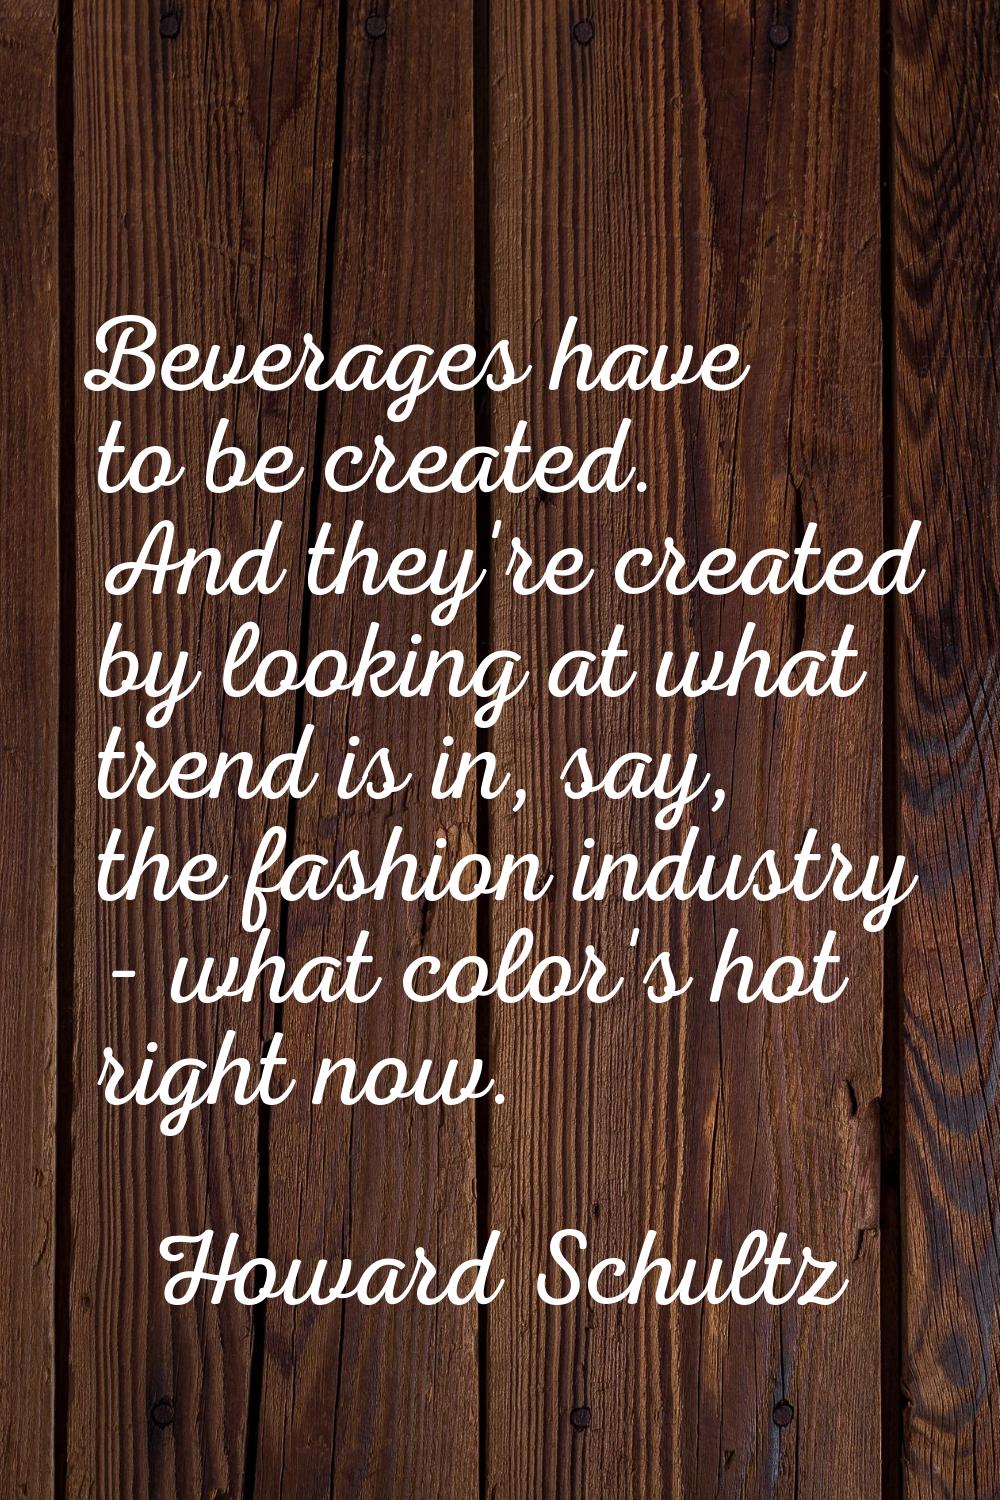 Beverages have to be created. And they're created by looking at what trend is in, say, the fashion 